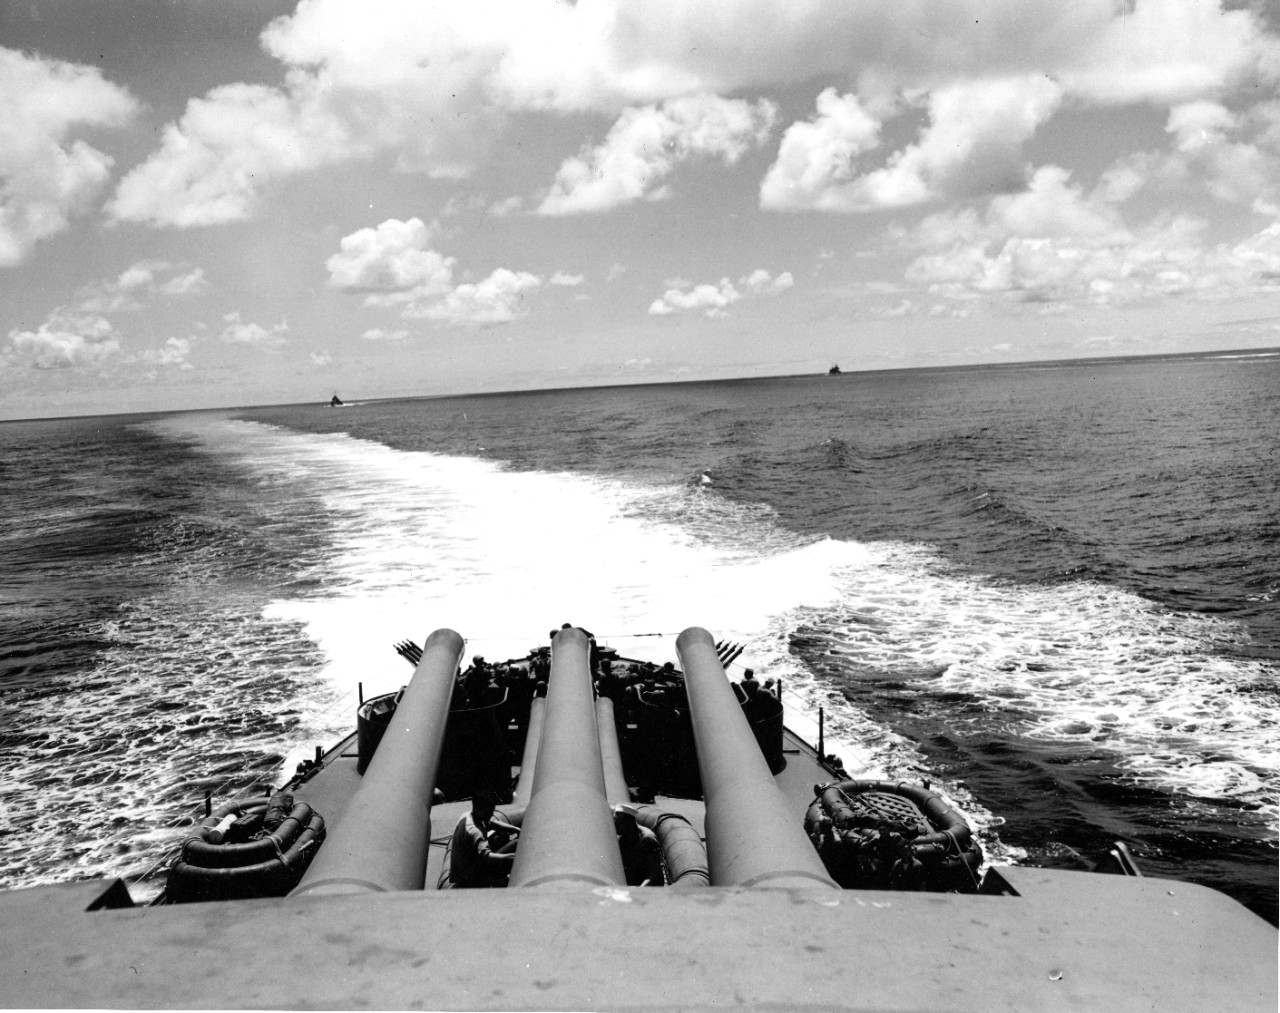 Photo #: 80-G-32315  Battle of Midway, June 1942